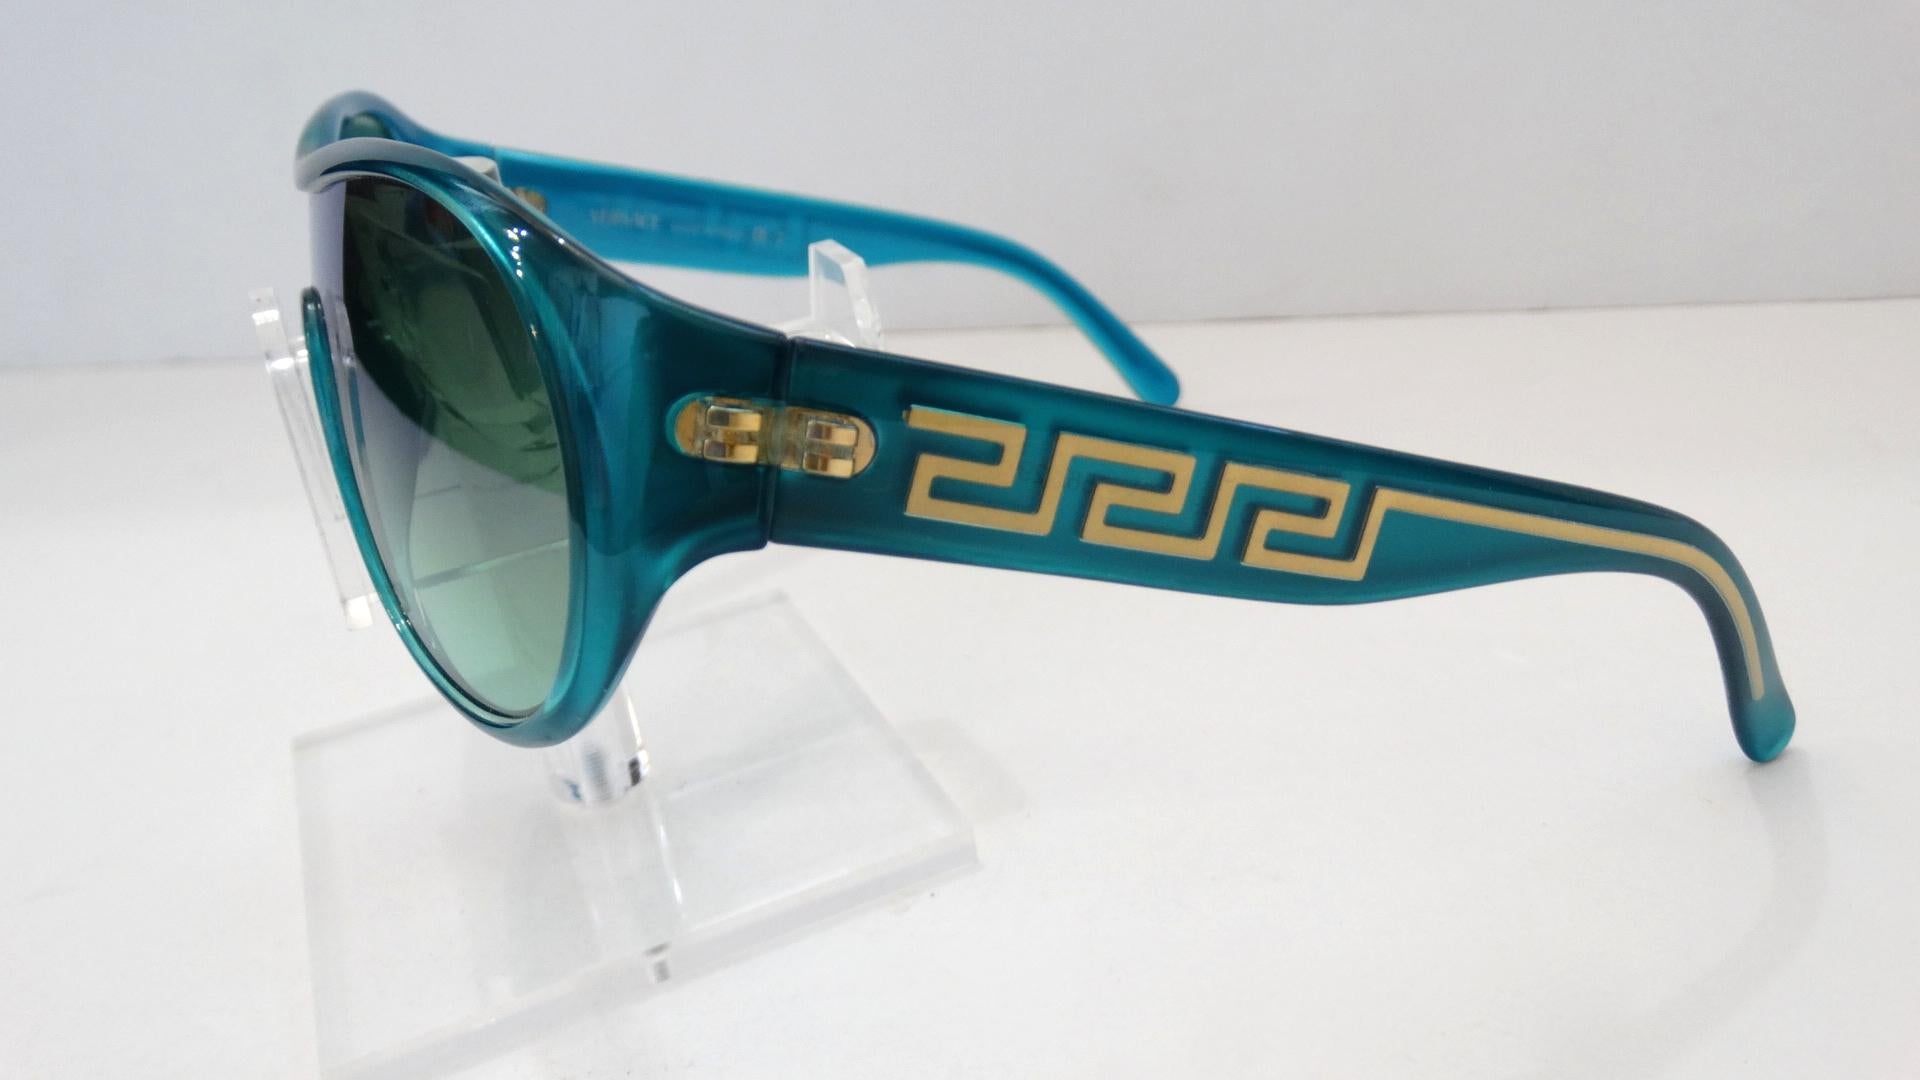 All Eyes On You While Wearing These Killer Versace Shield Sunglasses Circa 1990s! A dead stock treasure, these sunnies feature a vibrant and slightly shimmery turquoise frame with gold hardware and semi clear green/blue tinted reflective lenses. In